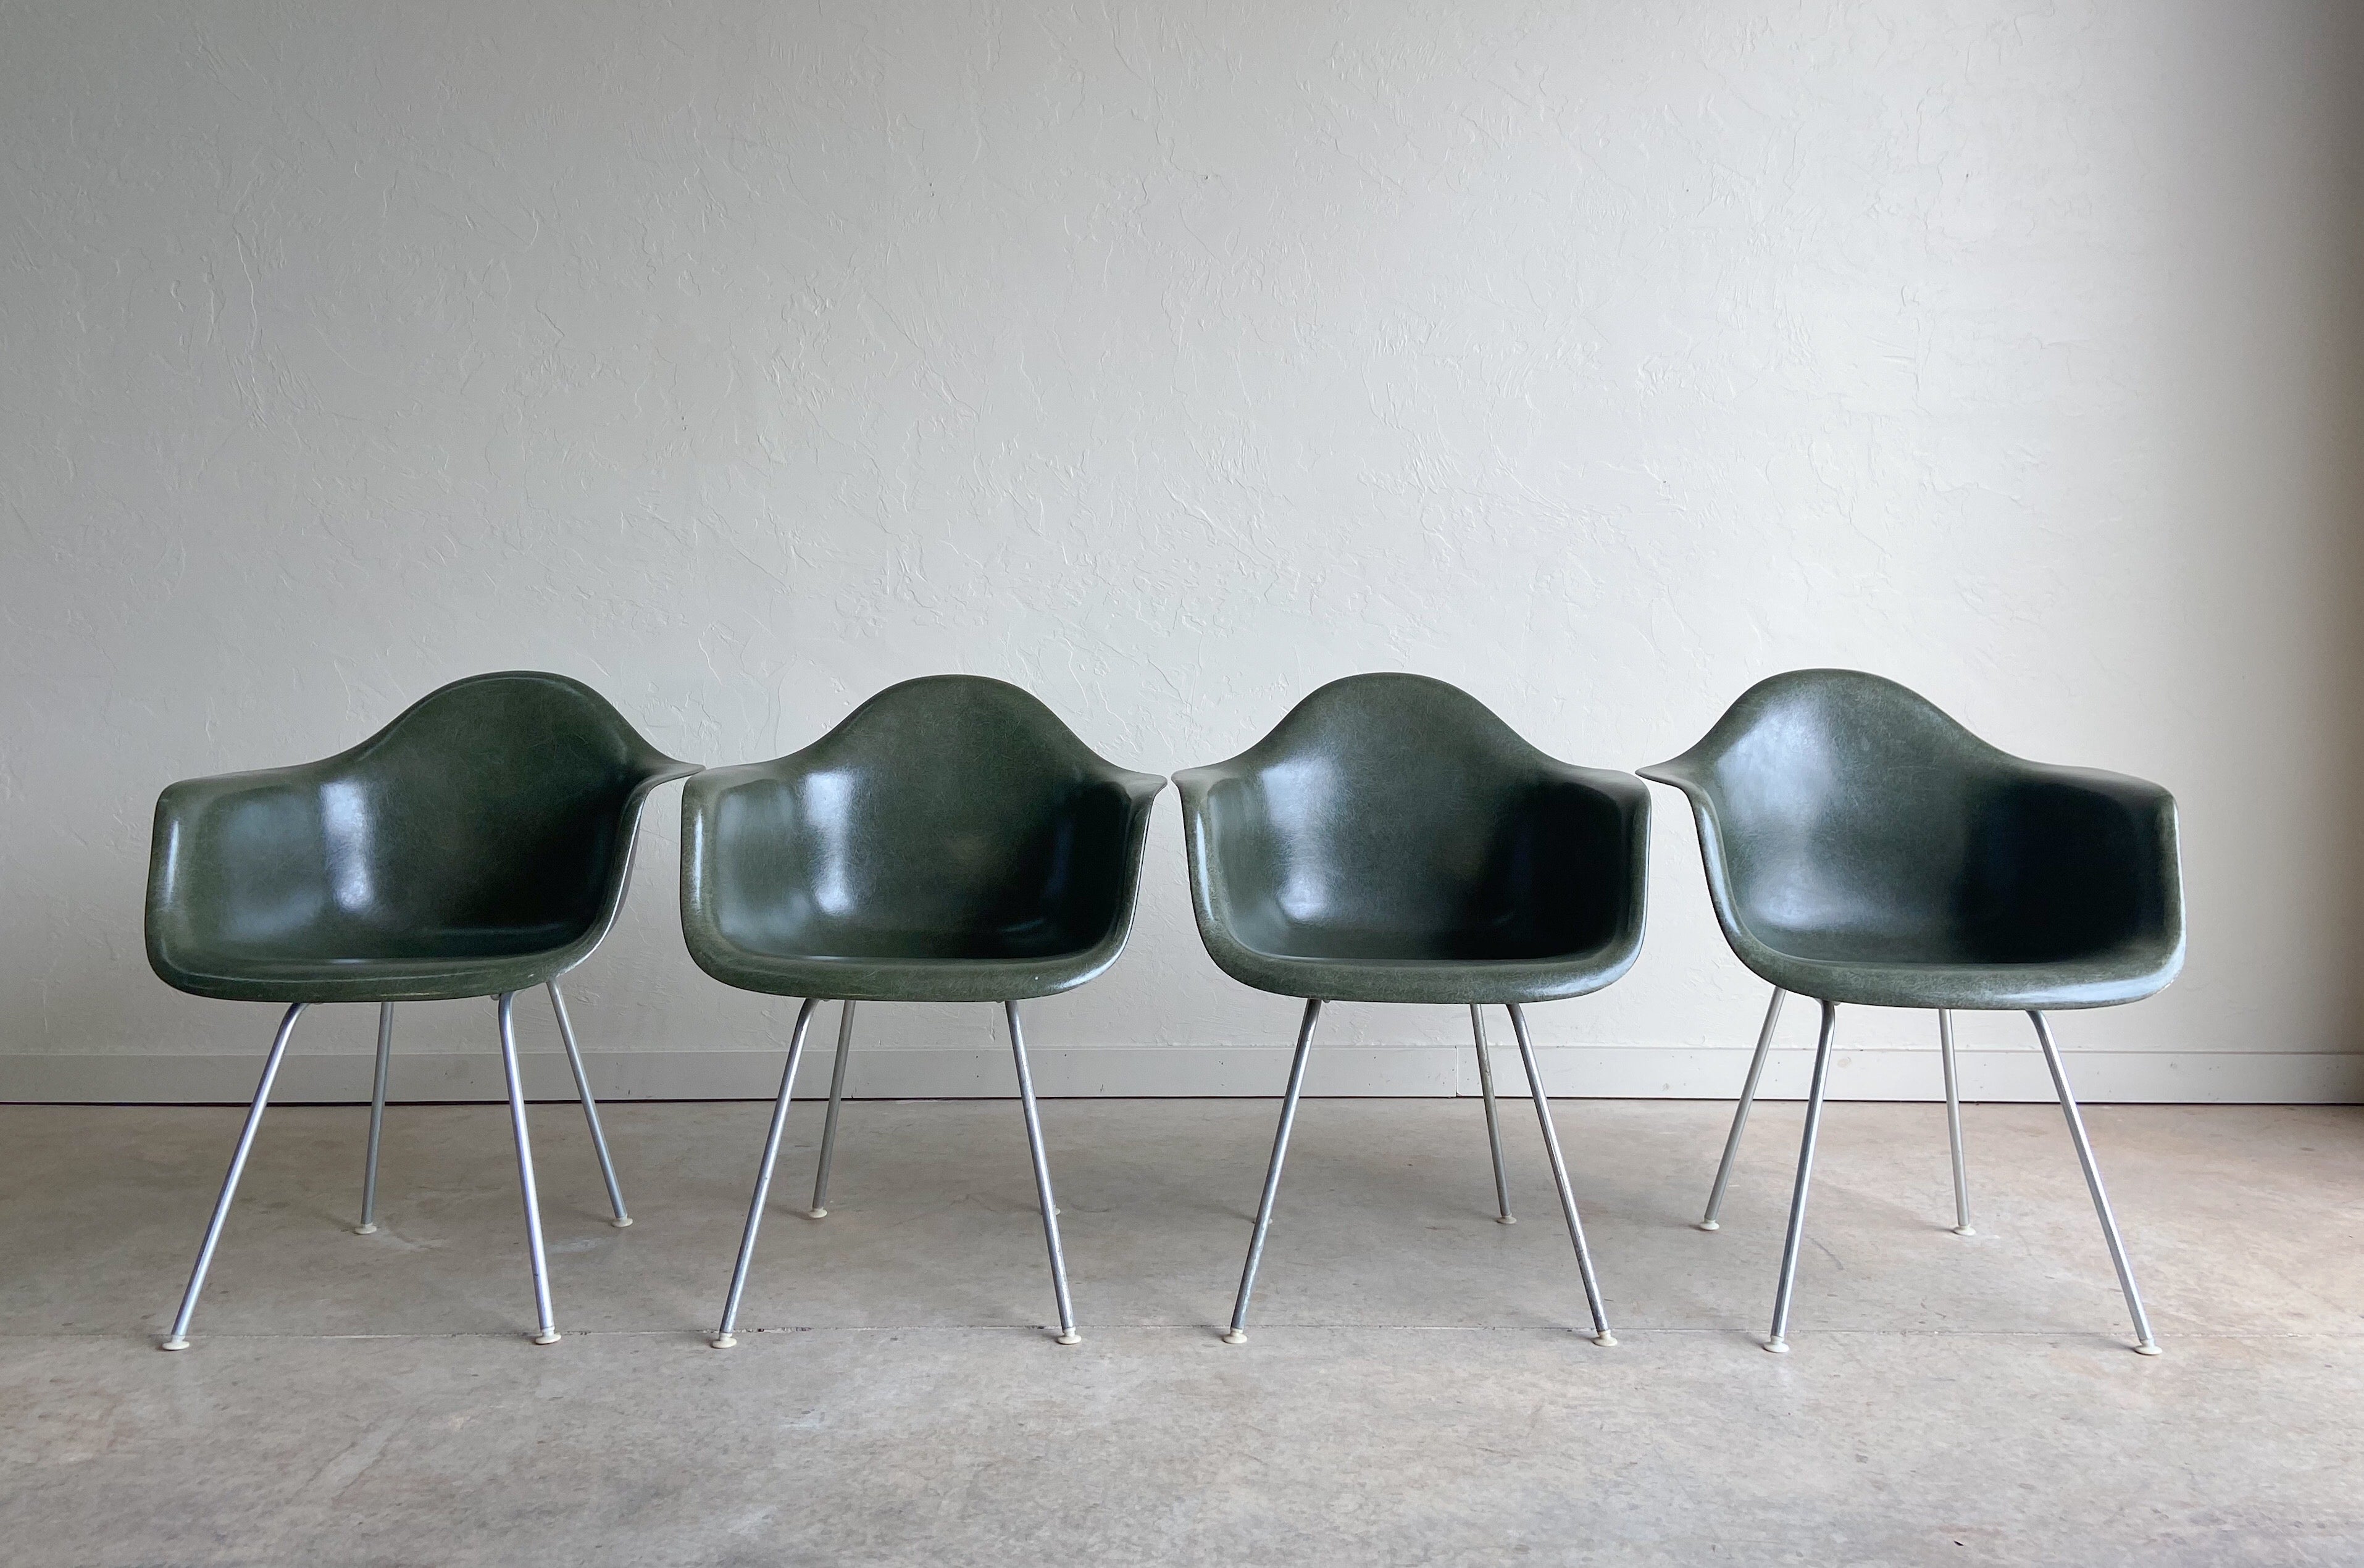 Herman Miller Fiberglass Chairs, Charles and Ray Eames, Olive Green, 1960's For Sale